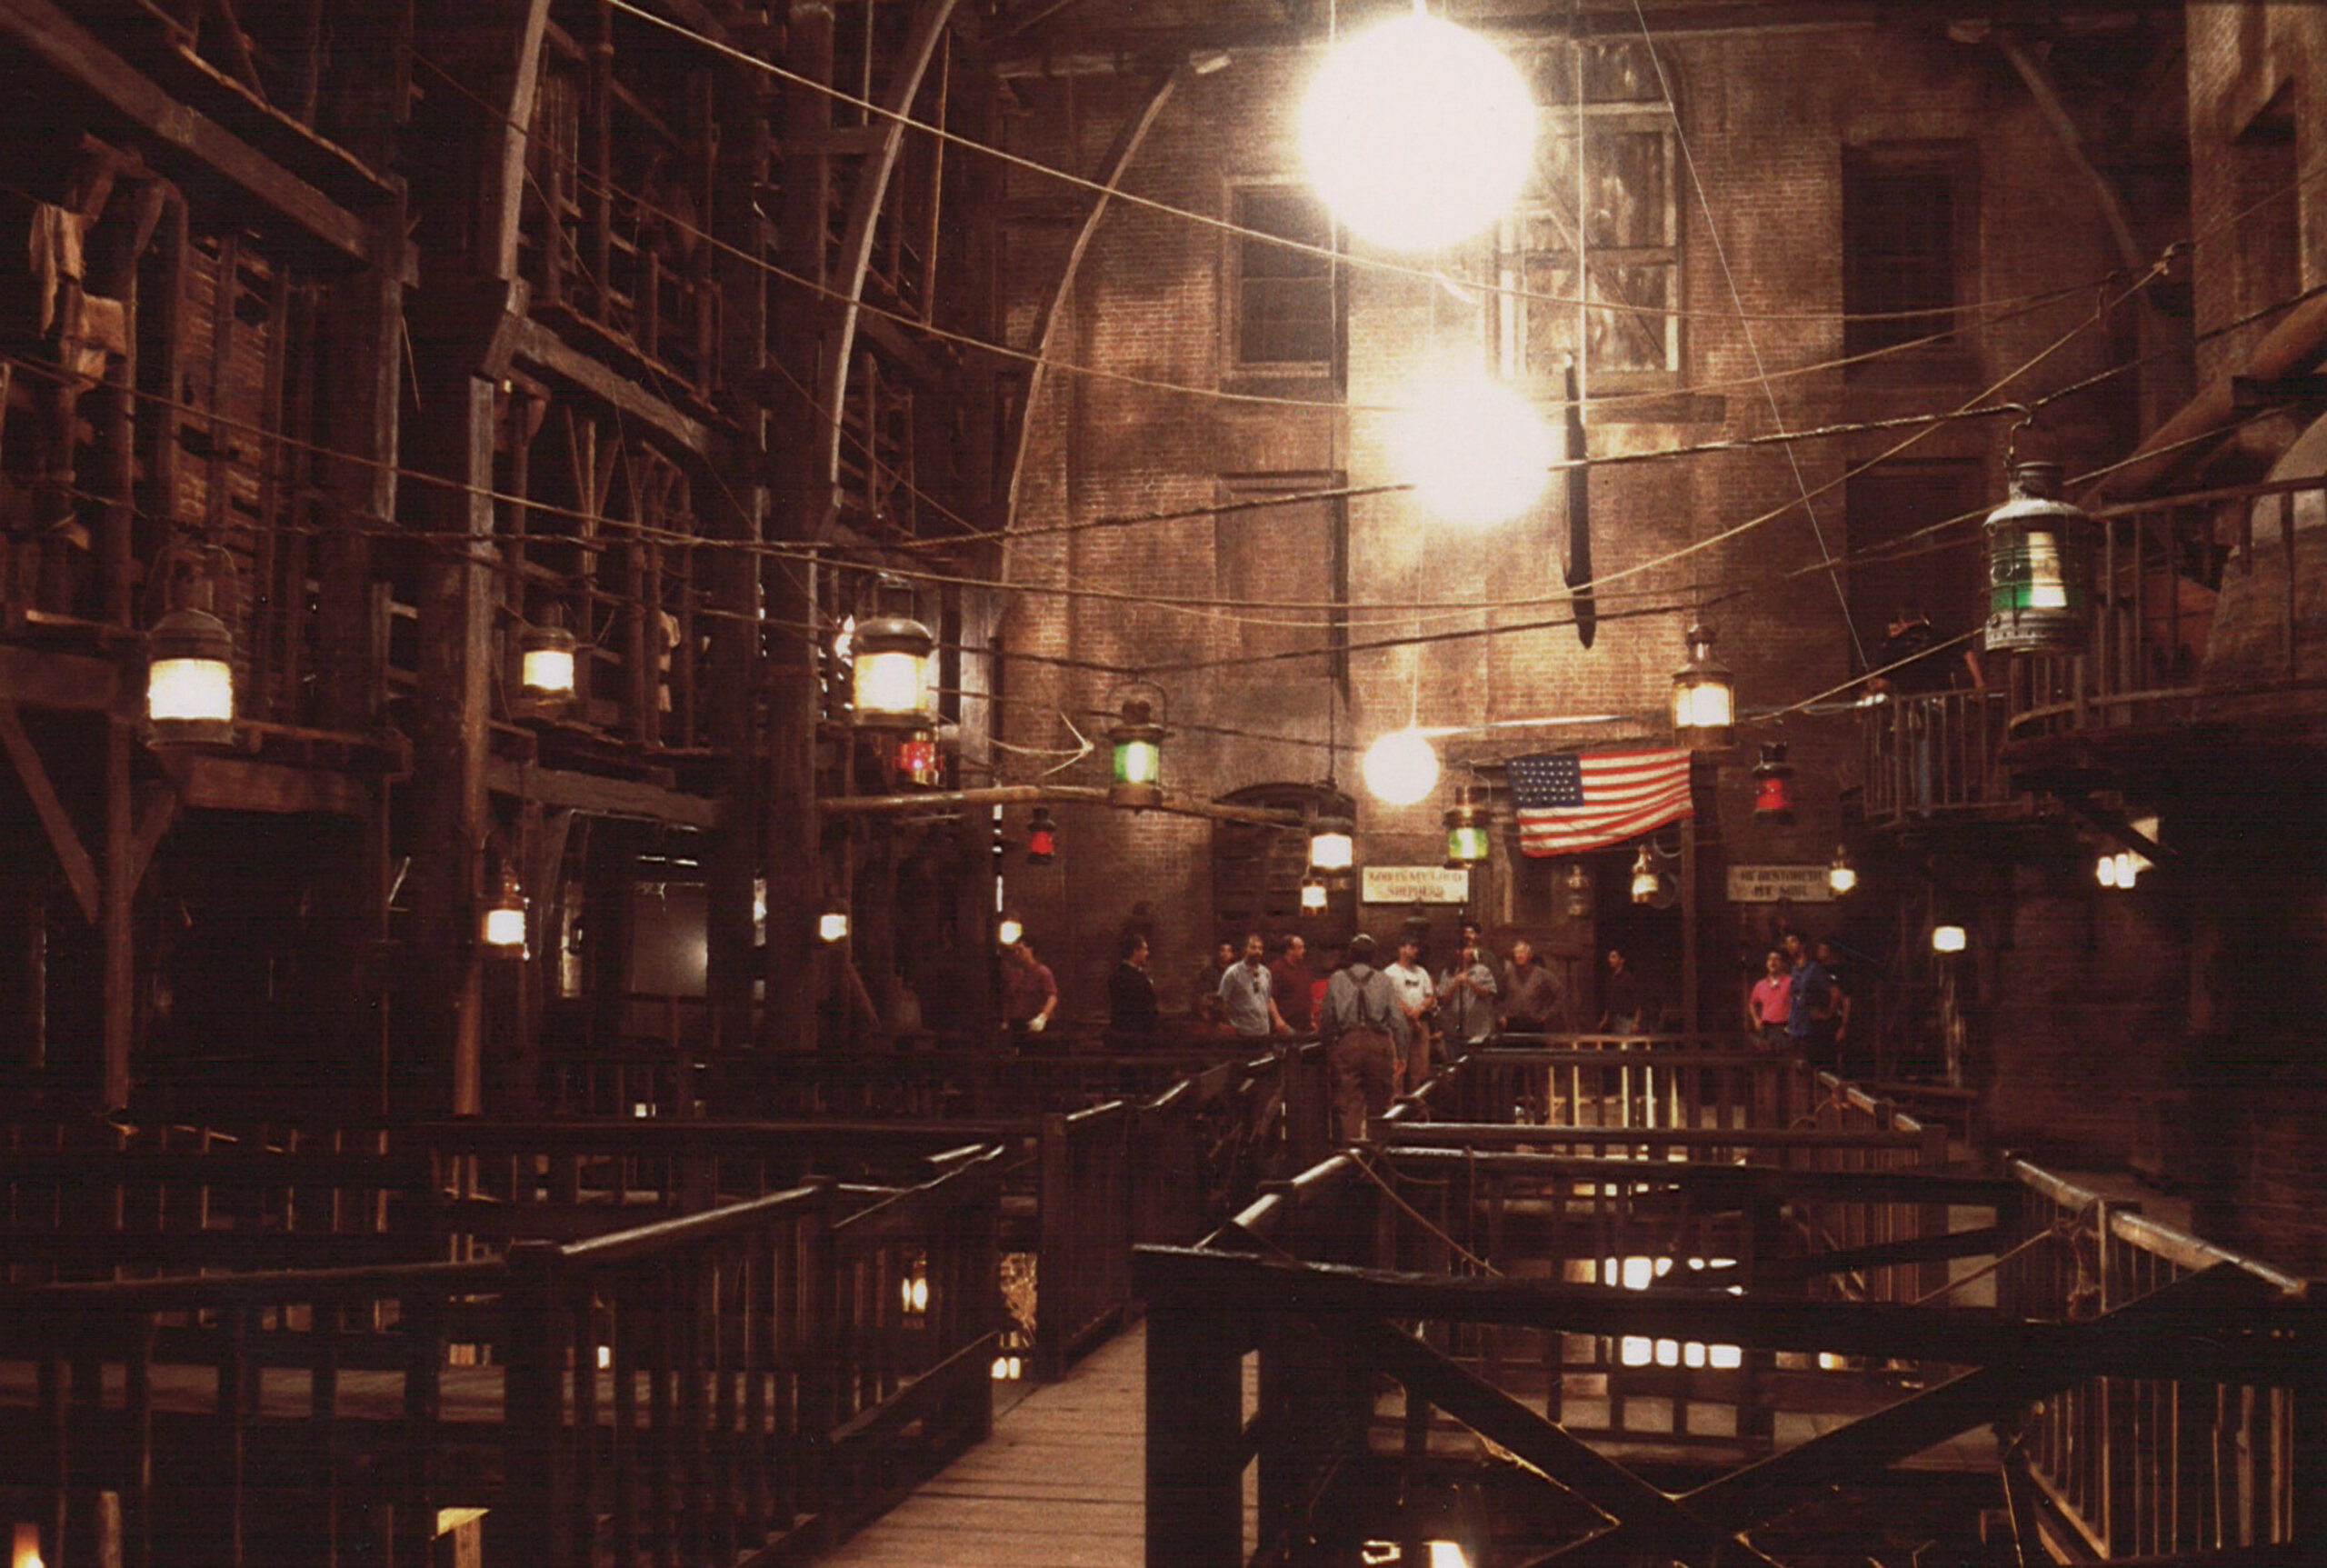 Gangs of New York - Directed by Martin Scorsese - The Old Brewery Interior Set - ©2002 - Miramax Films